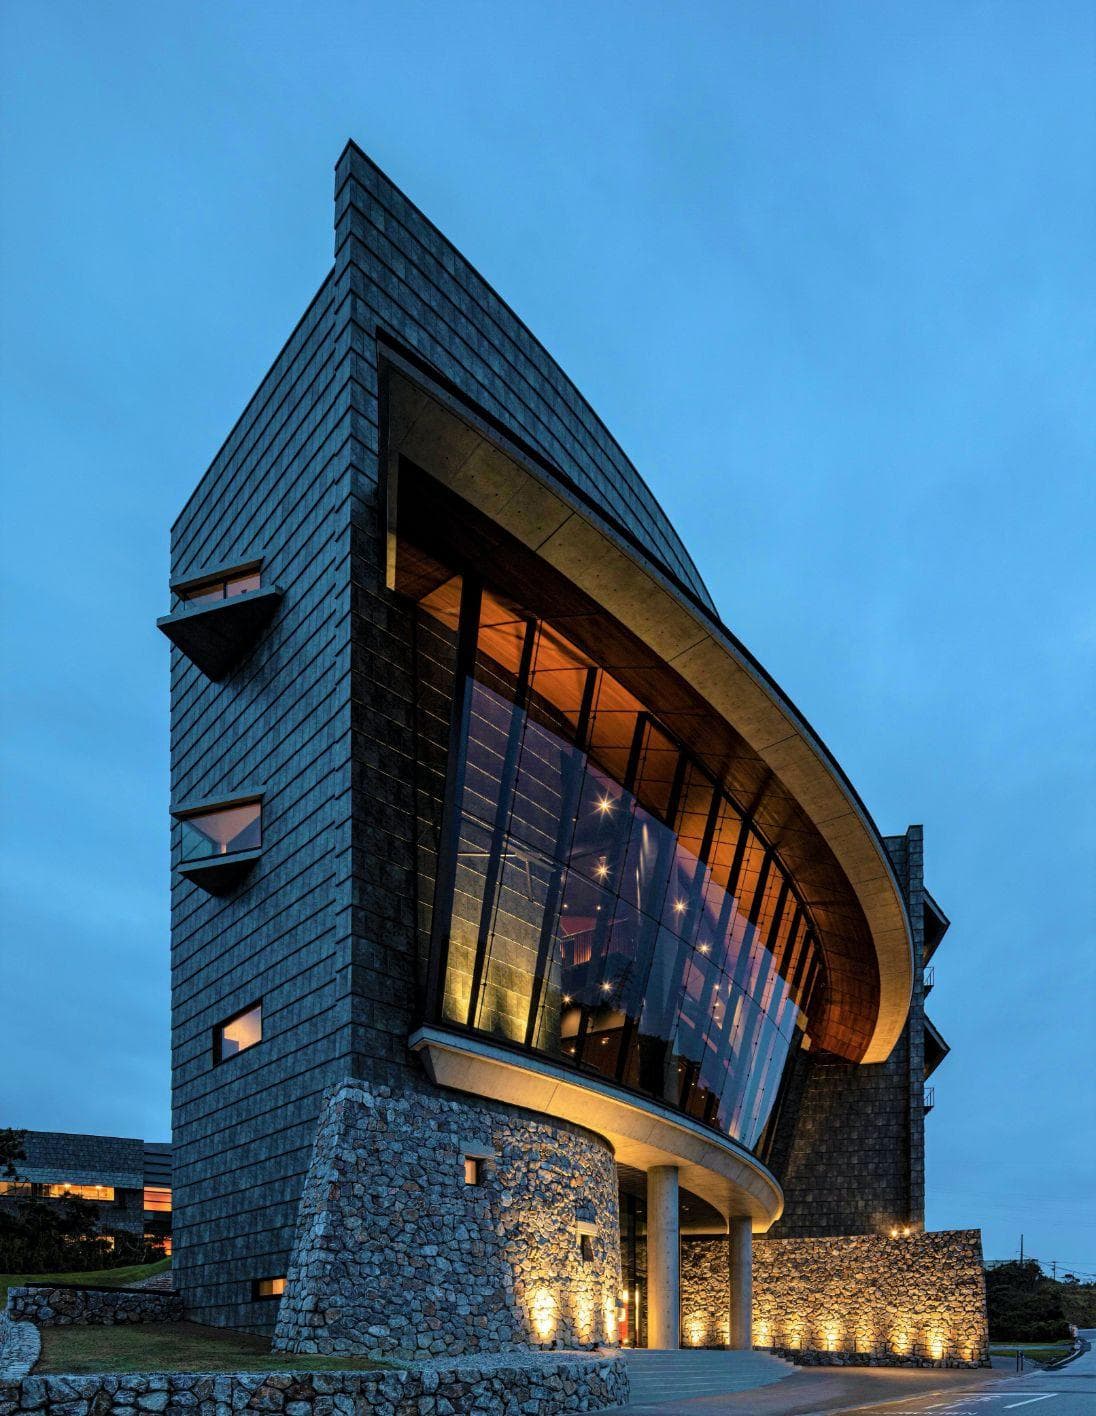 Angular with a curved glass front, Lab 4 entrance facade rises into the night sky.